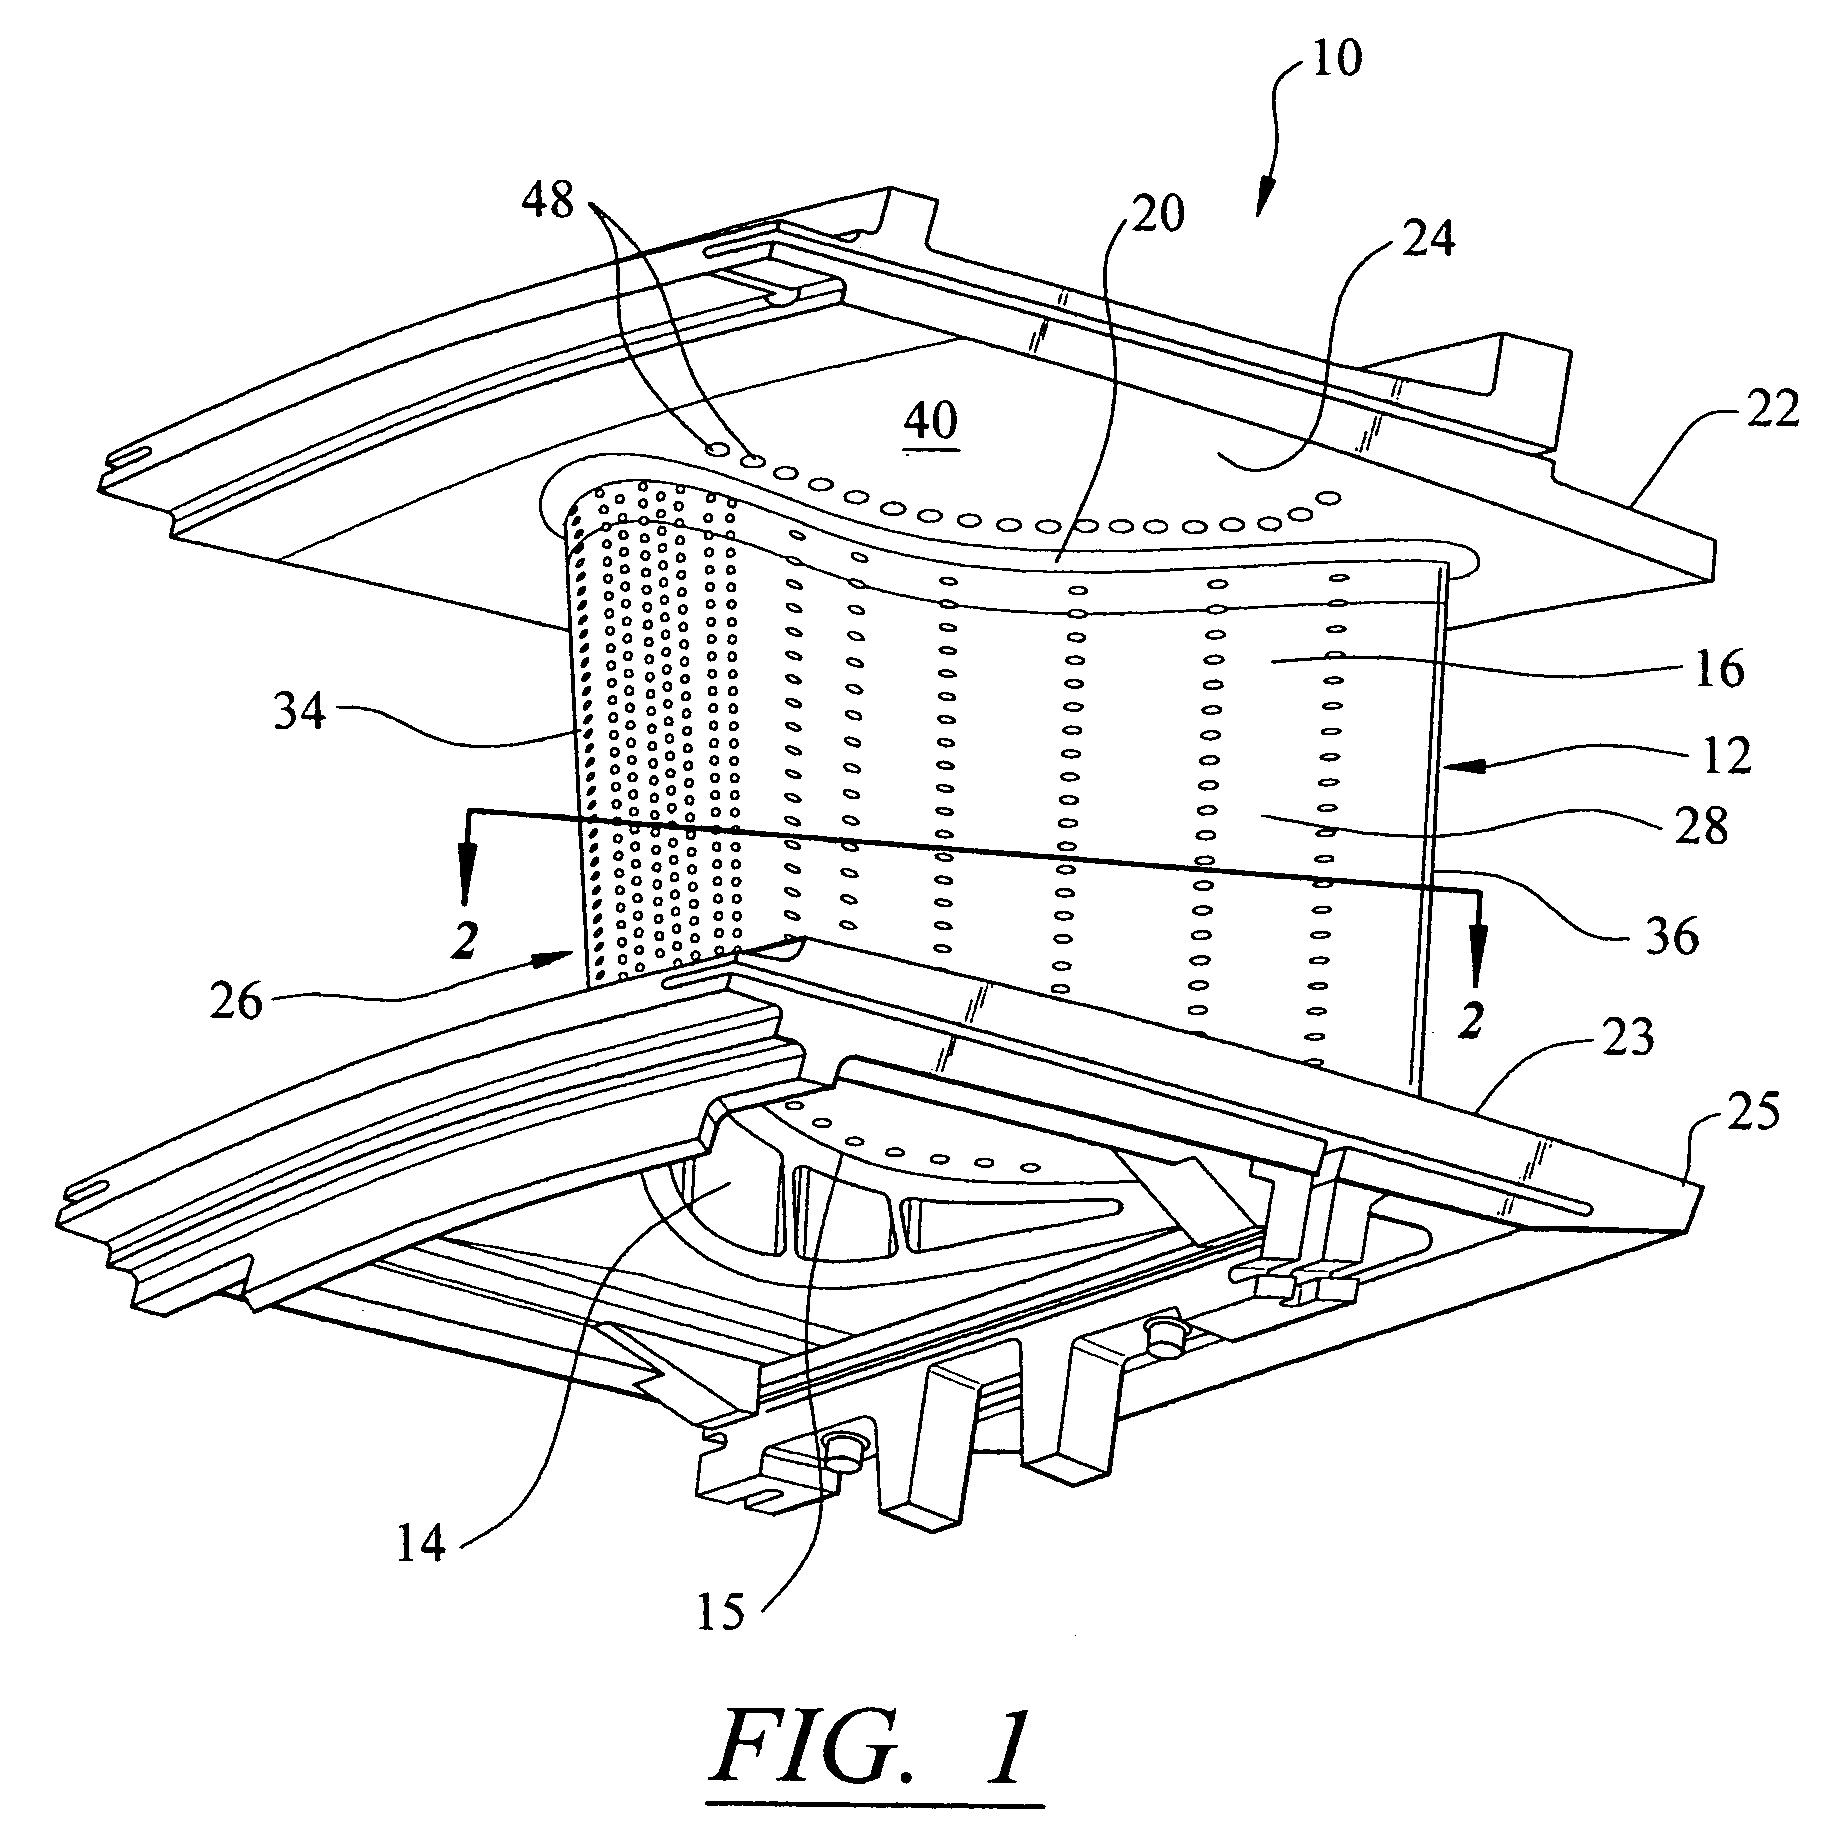 Cooling system for an airfoil vane